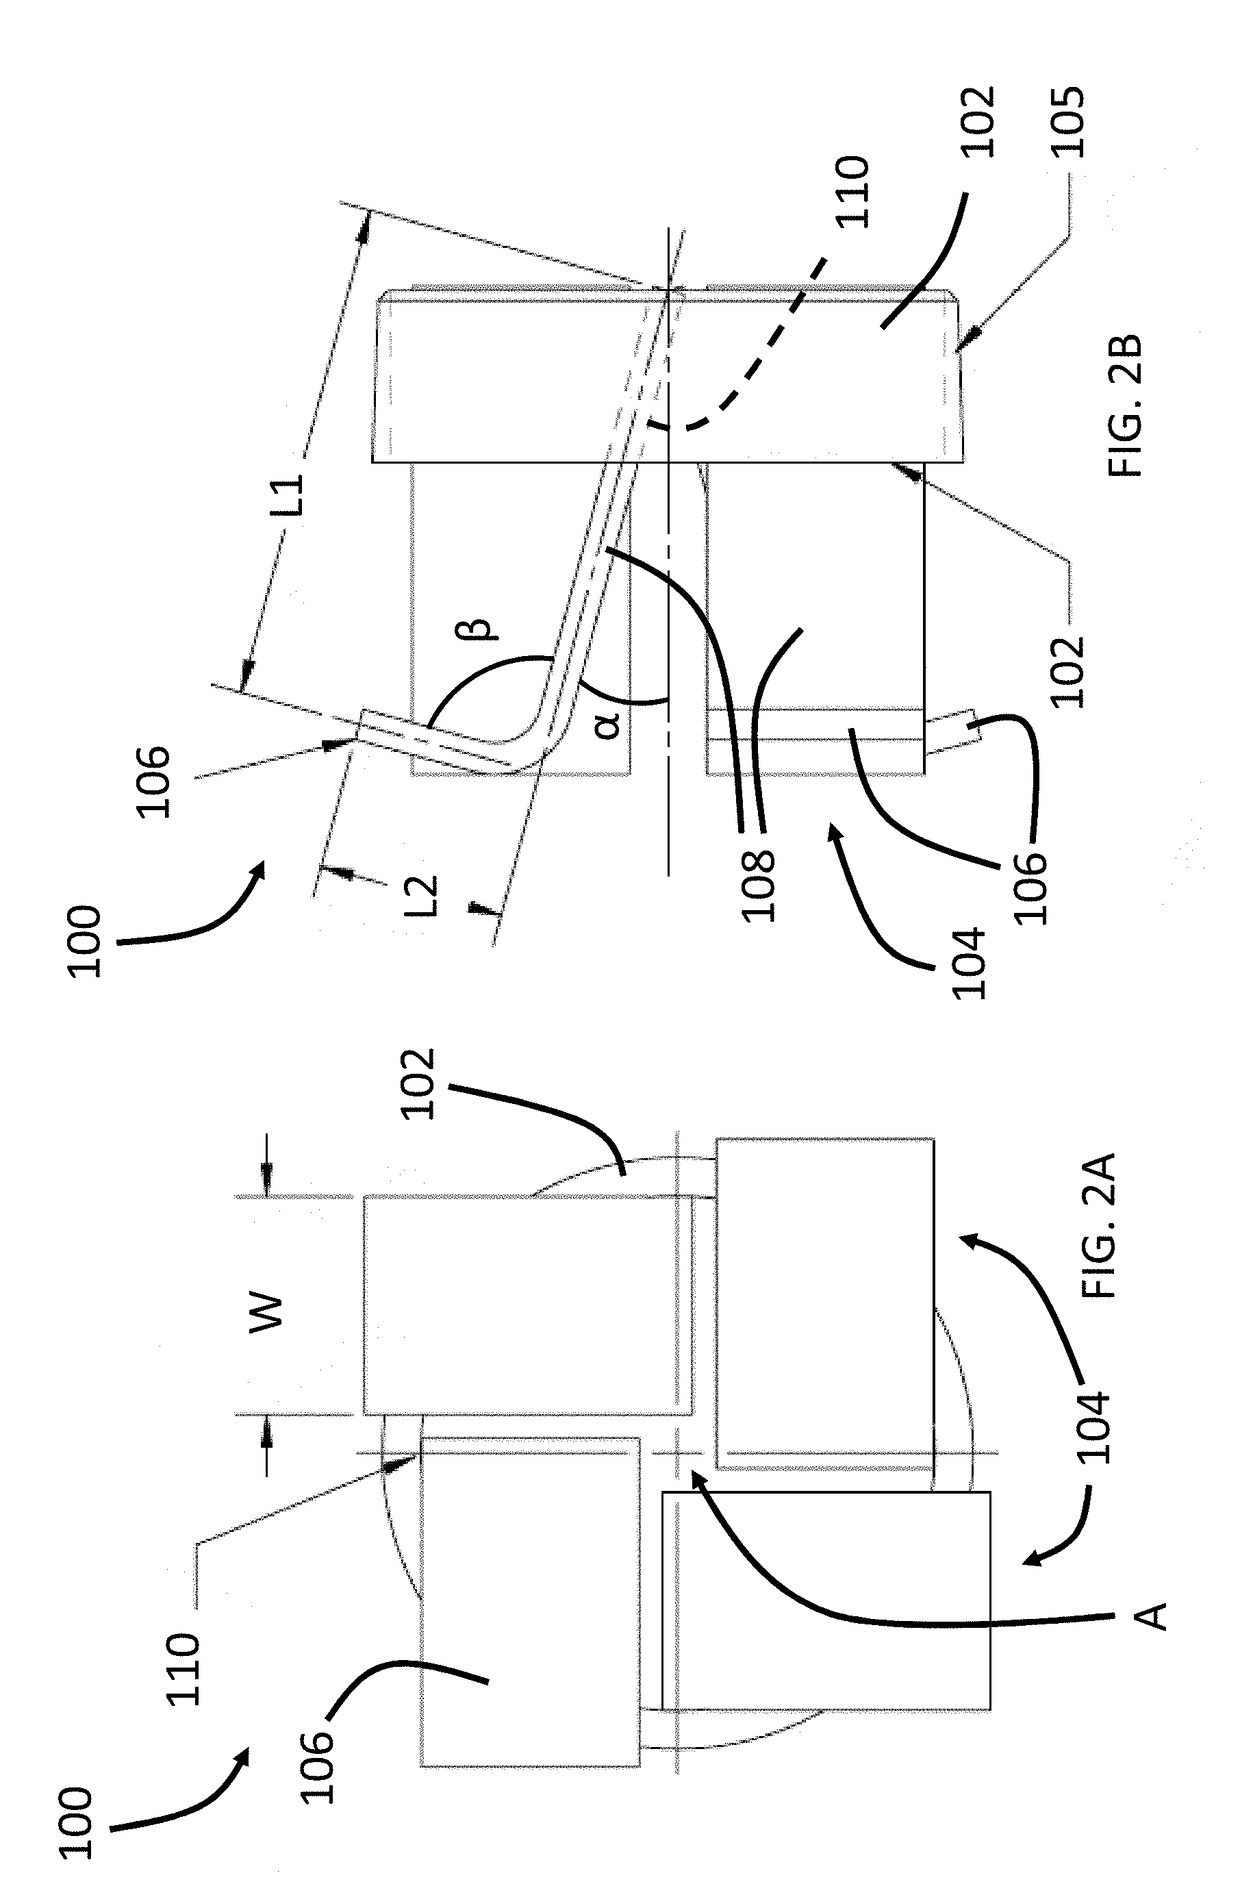 Baffle assembly for modifying transitional flow effects between different cavities